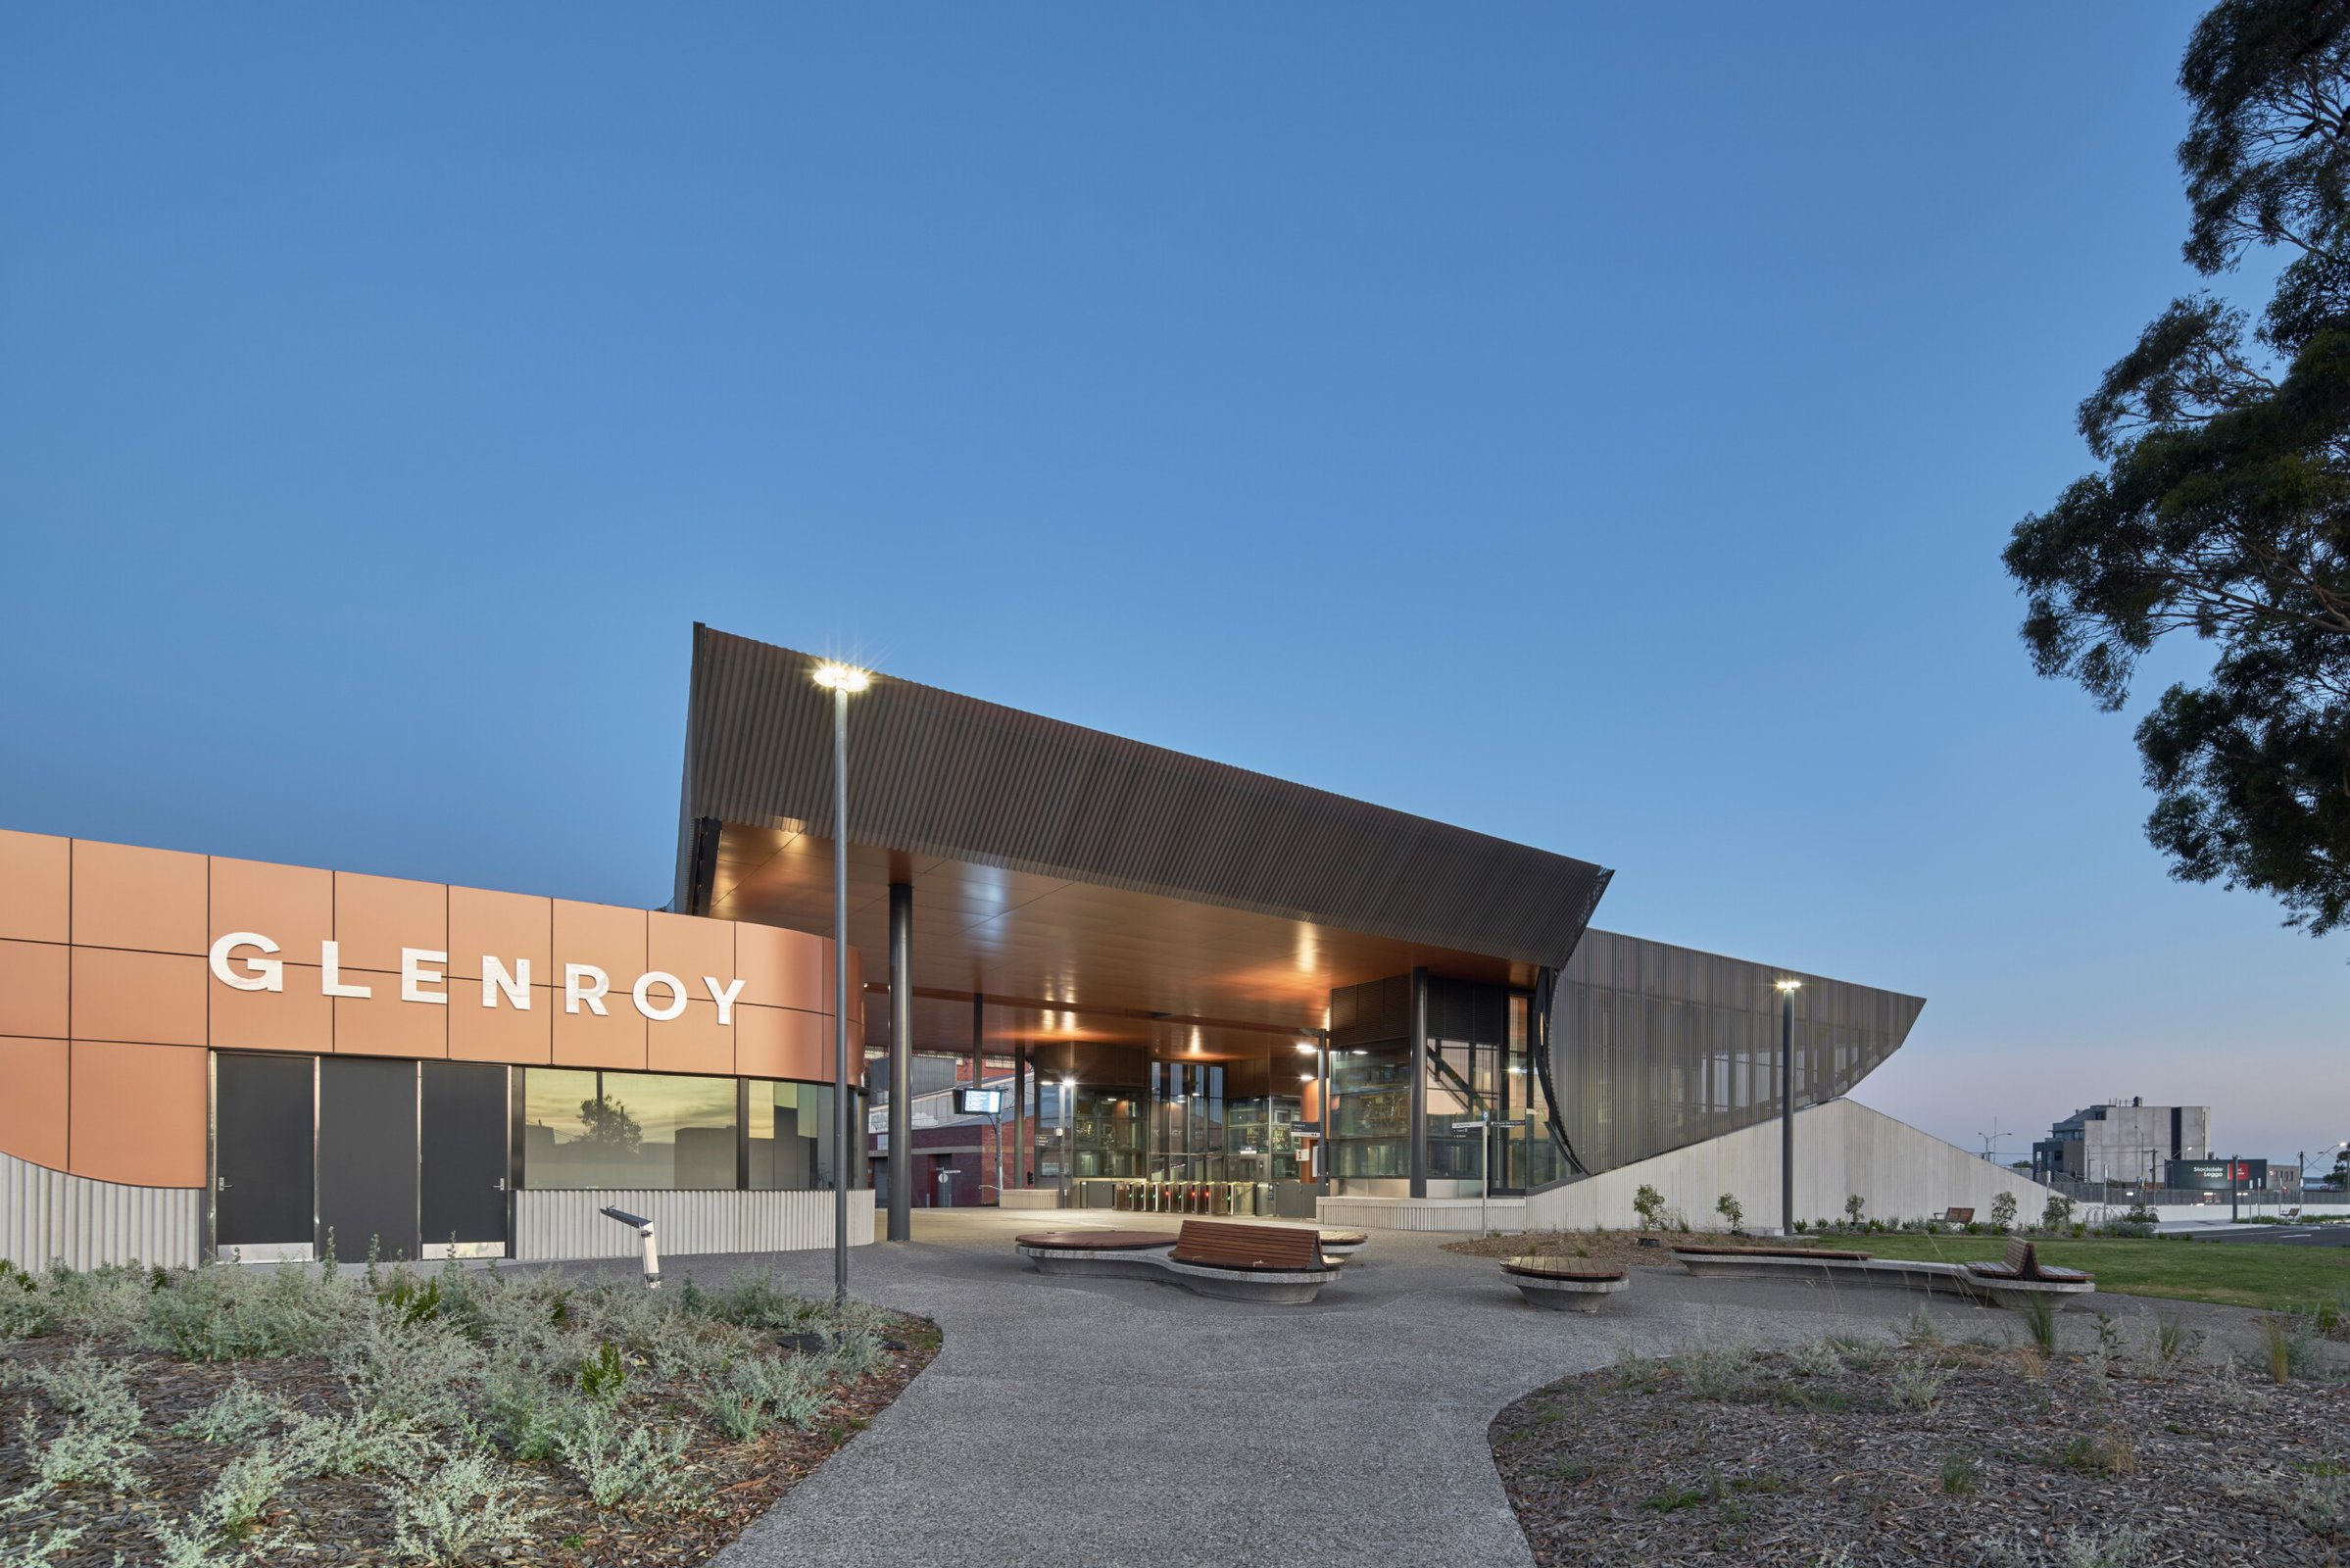 Glenroy Station to open May 8th